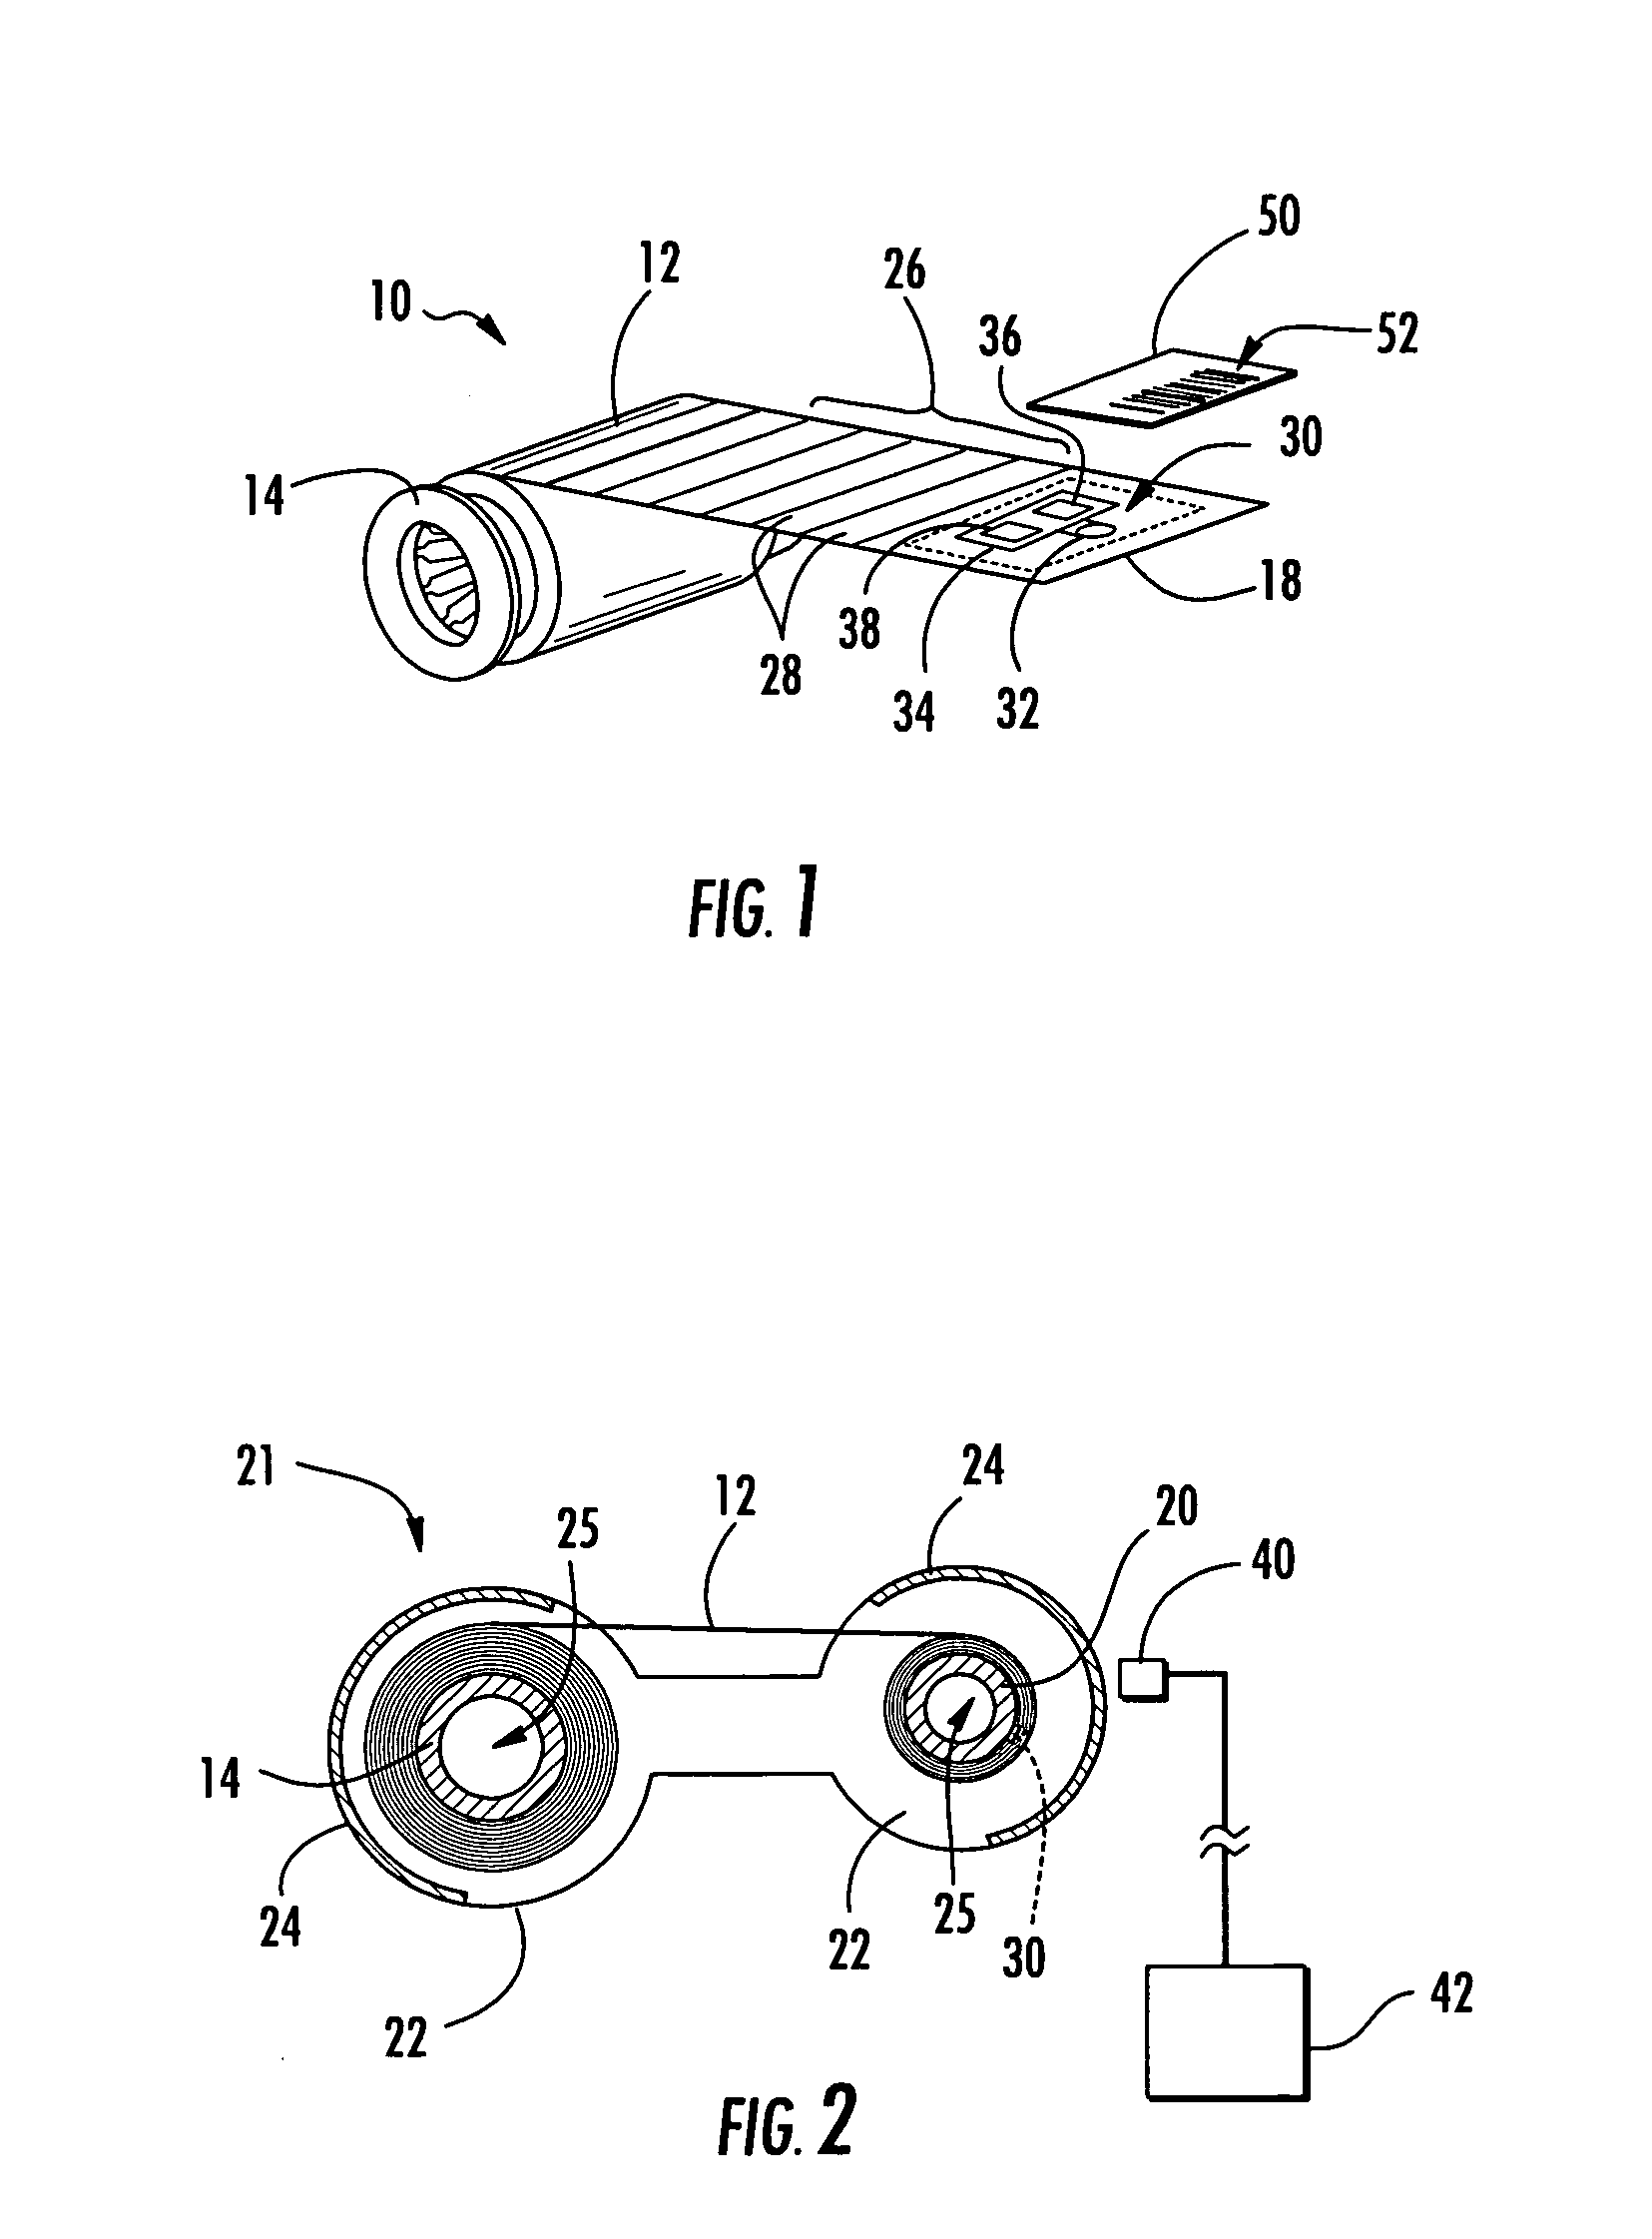 Systems and methods for providing a media located on a spool and/or a cartridge where the media includes a wireless communication device attached thereto